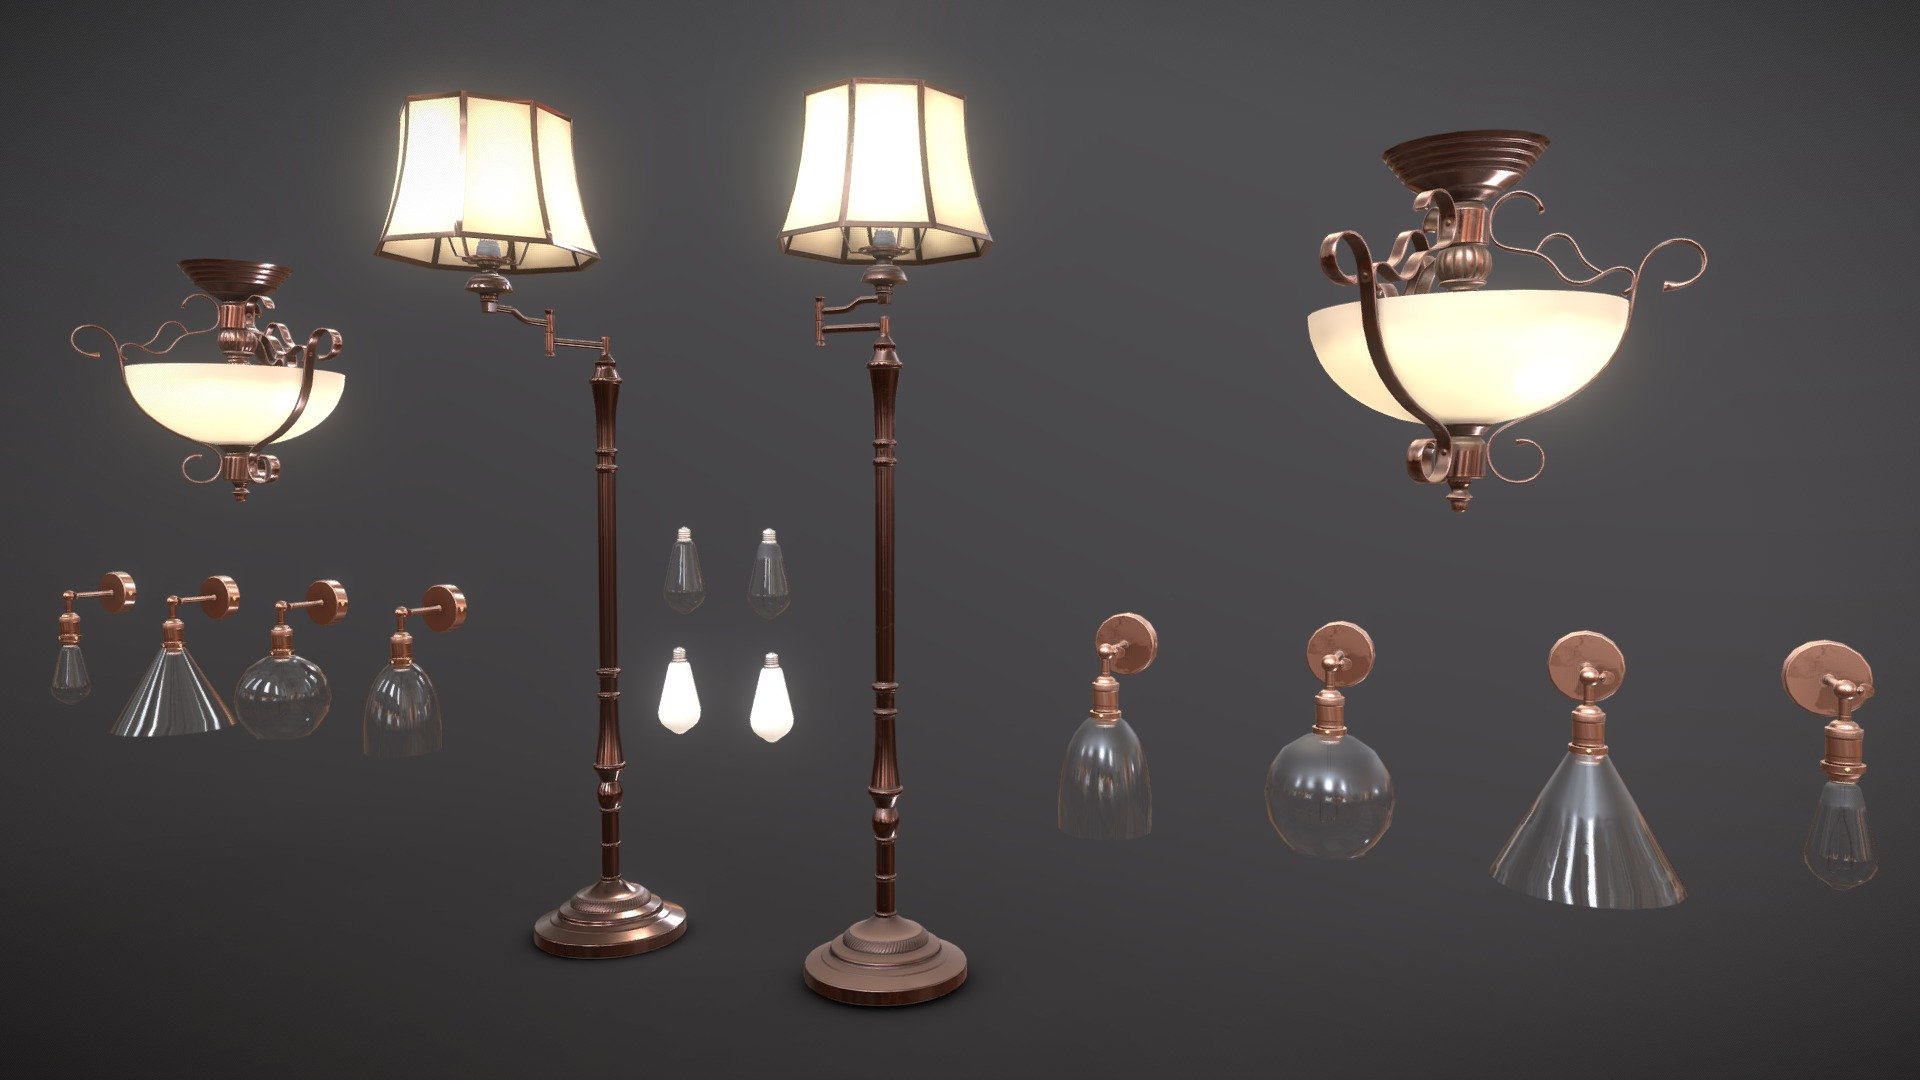 Realistic Vintage Lamps Pack with High Quality PBR Textures.

Floor Lamp: 6348 Tris (3416 Vertices)
Ceiling Lamp: 6802 Tris (3527 Vertices)
Wall Lamp: 1772 Tris (989 Vertices)
3x Wall Lamp Plafonds: 120-768 Tris (80-400 Vertices)
Lamp: 896 Tris (472 Vertices)

Blend, FBX, UnityPackages (2019.4, Built-In/URP/HDRP) formats.
Materials and textures included.
Metallic/Roughness PBR, Unity Built-In/URP/HDRP and UE4 Texture Sets Dirty and Clean 4096px PNG Textures.

Model by @Bek, Idea and Art Direction by Me 3d model